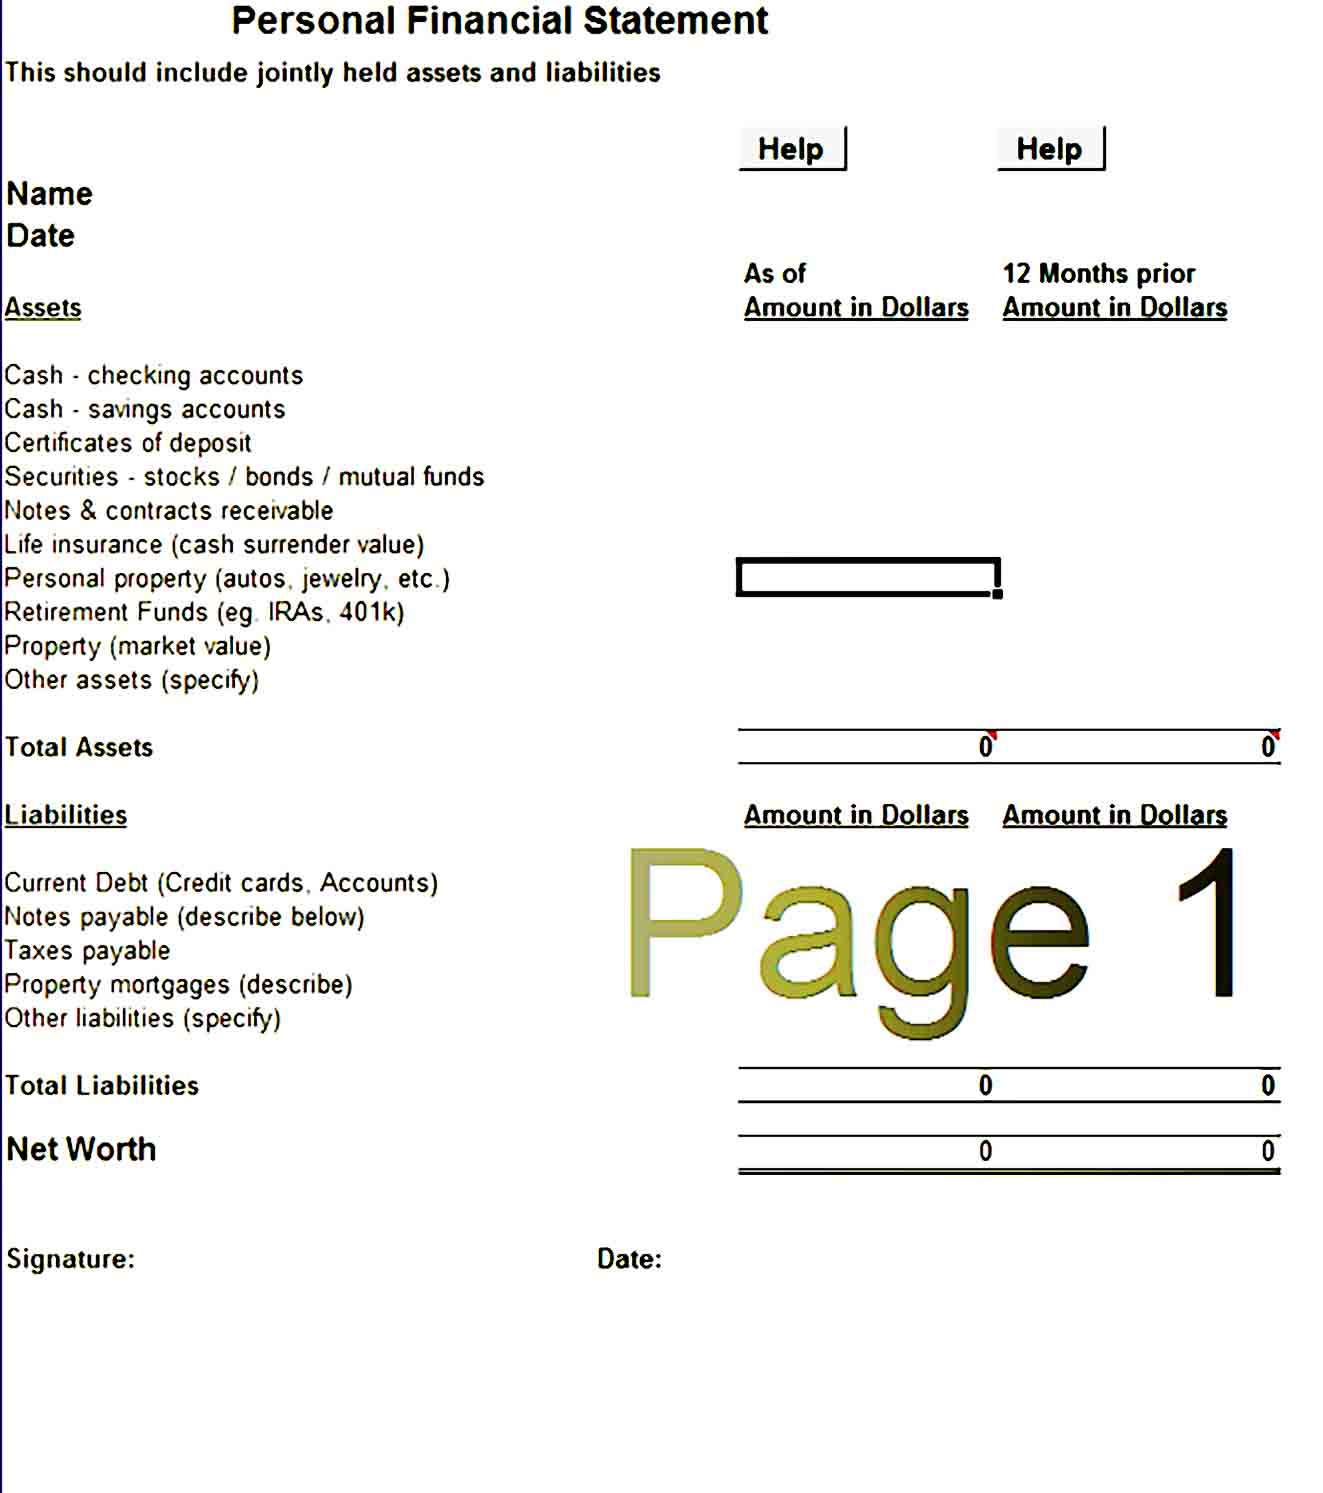 Personal Financial Statement Template 33